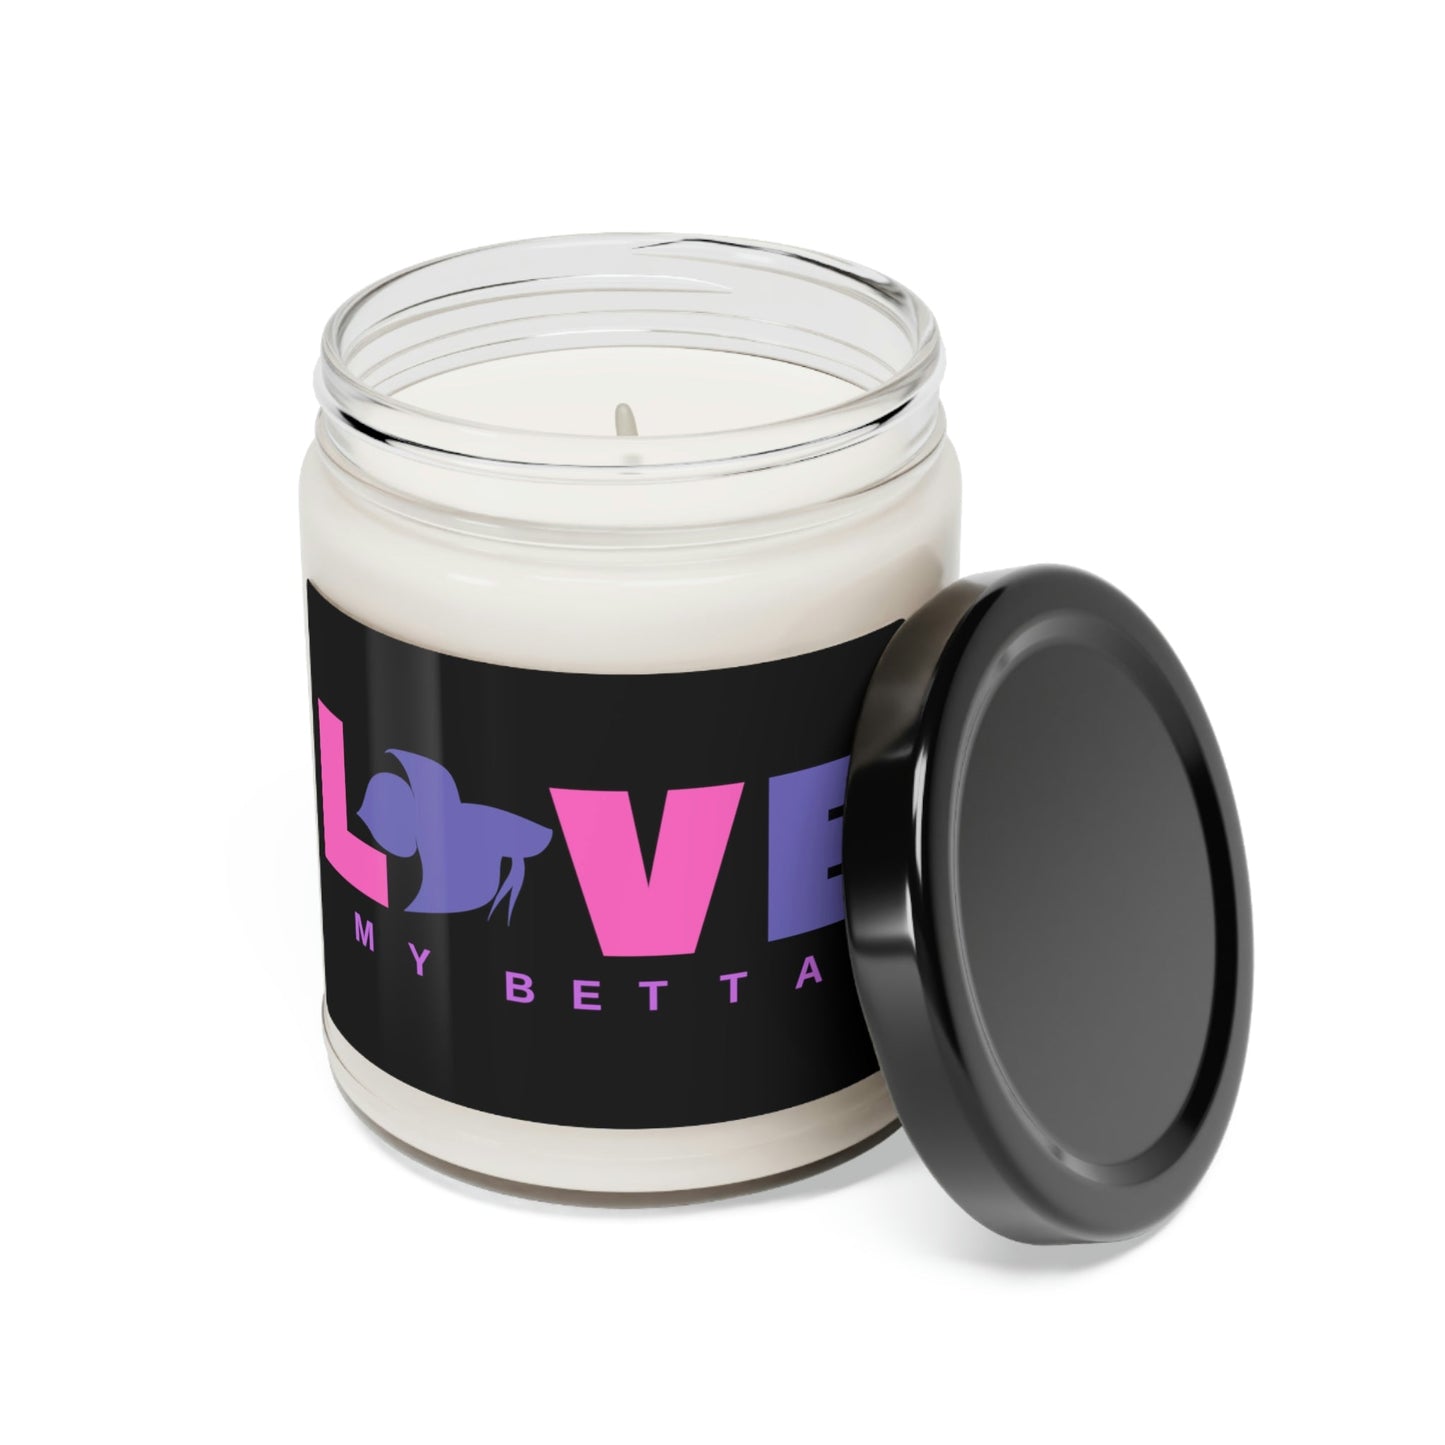 Love My Betta Scented Soy Candle - 9oz